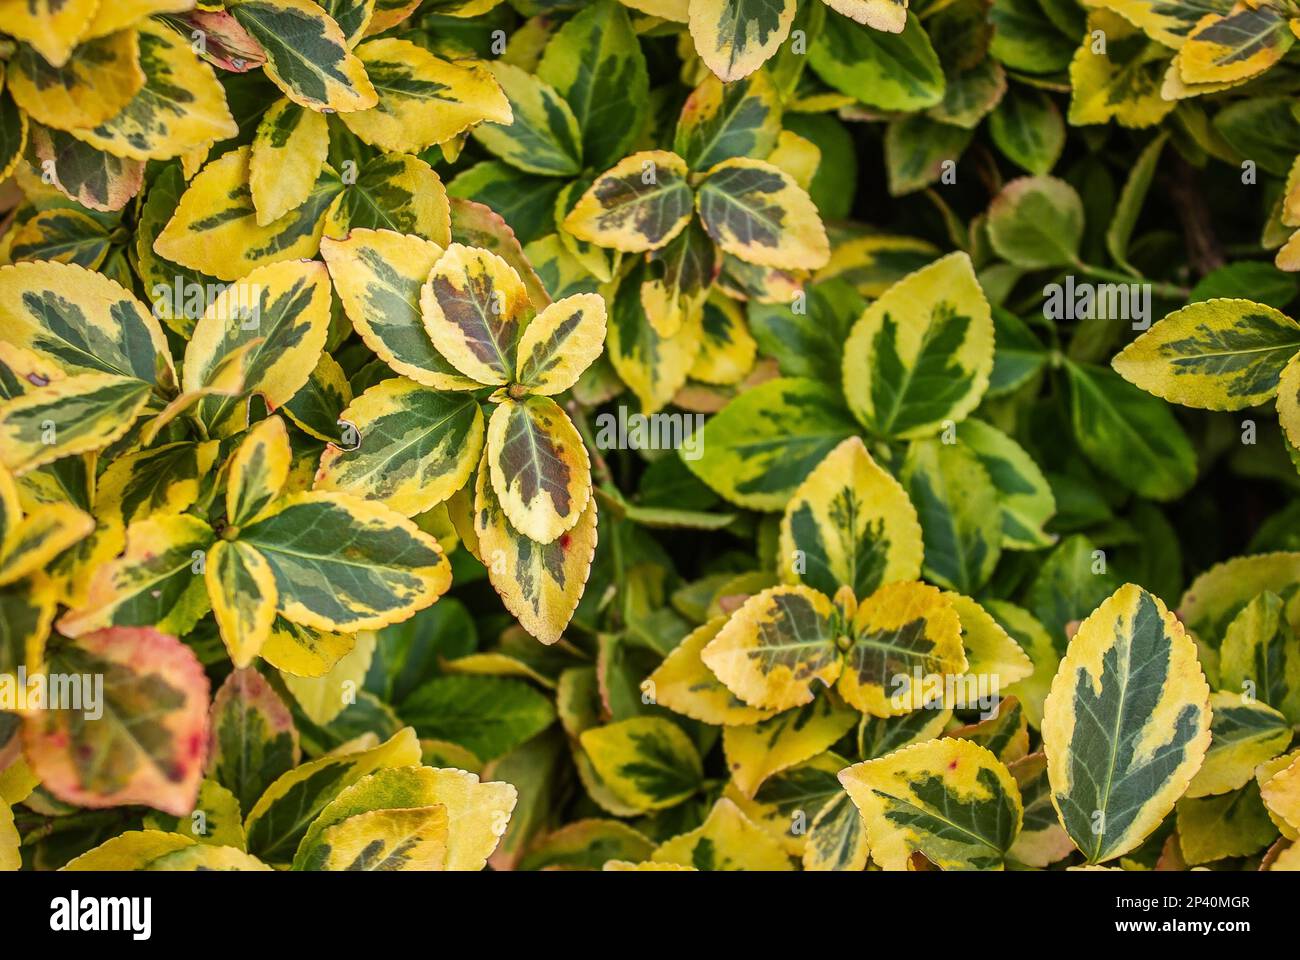 Euonymus Fortunei Emeralnd n gold cultivar leaves, yellow and green leaf, ornamental branches, foliage background. Bright yellow green leaves of Euony Stock Photo